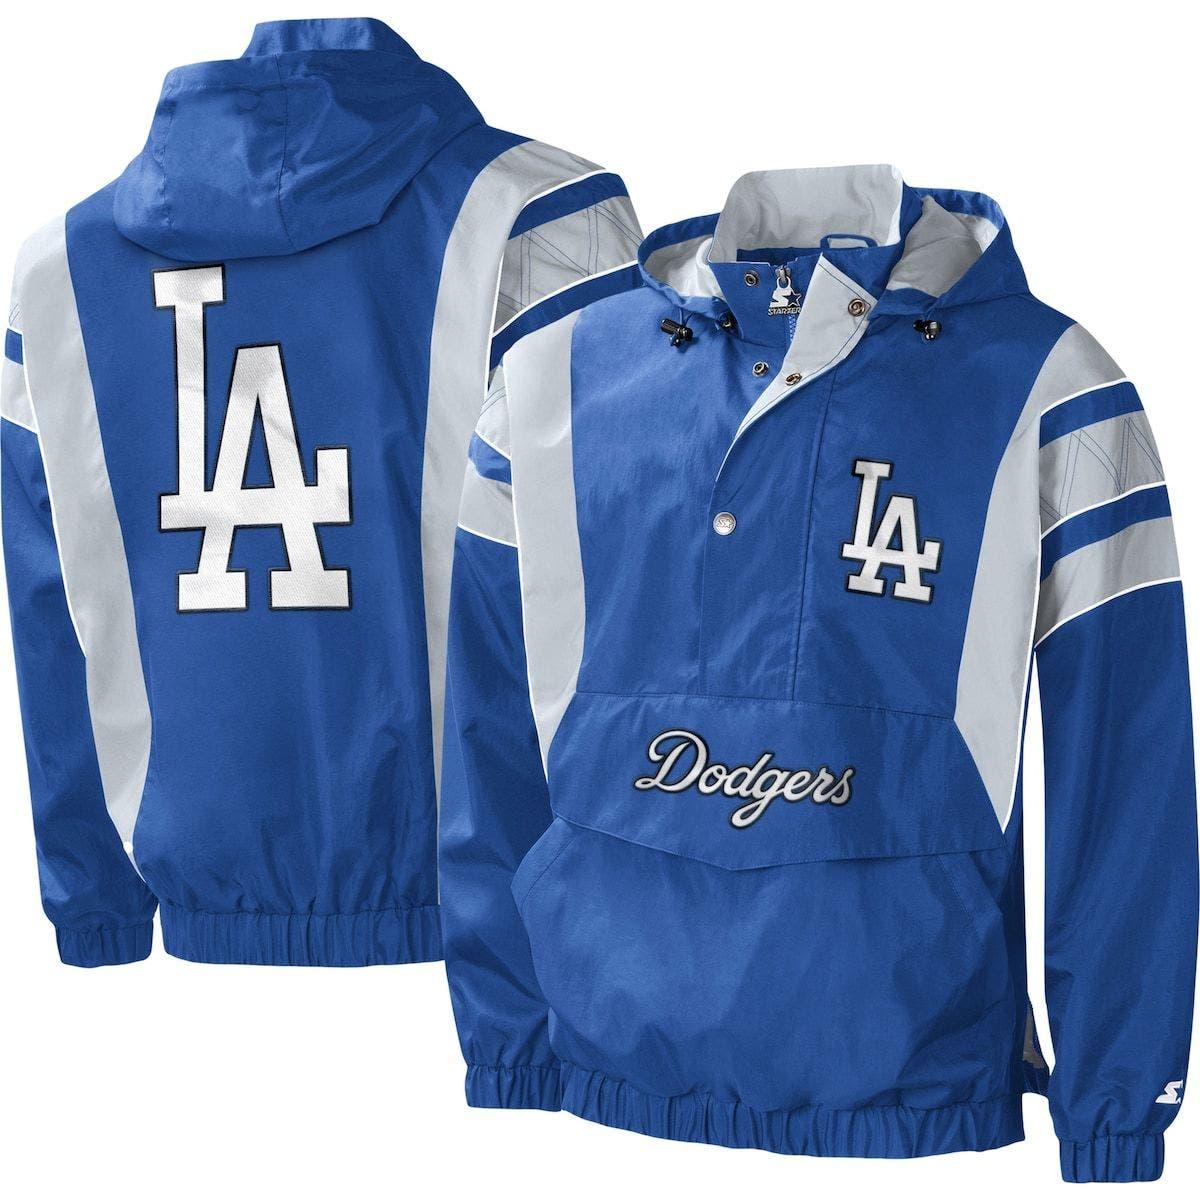 Men's Starter Royal Los Angeles Dodgers Force Play II Half-Zip Hooded Jacket Size: Small